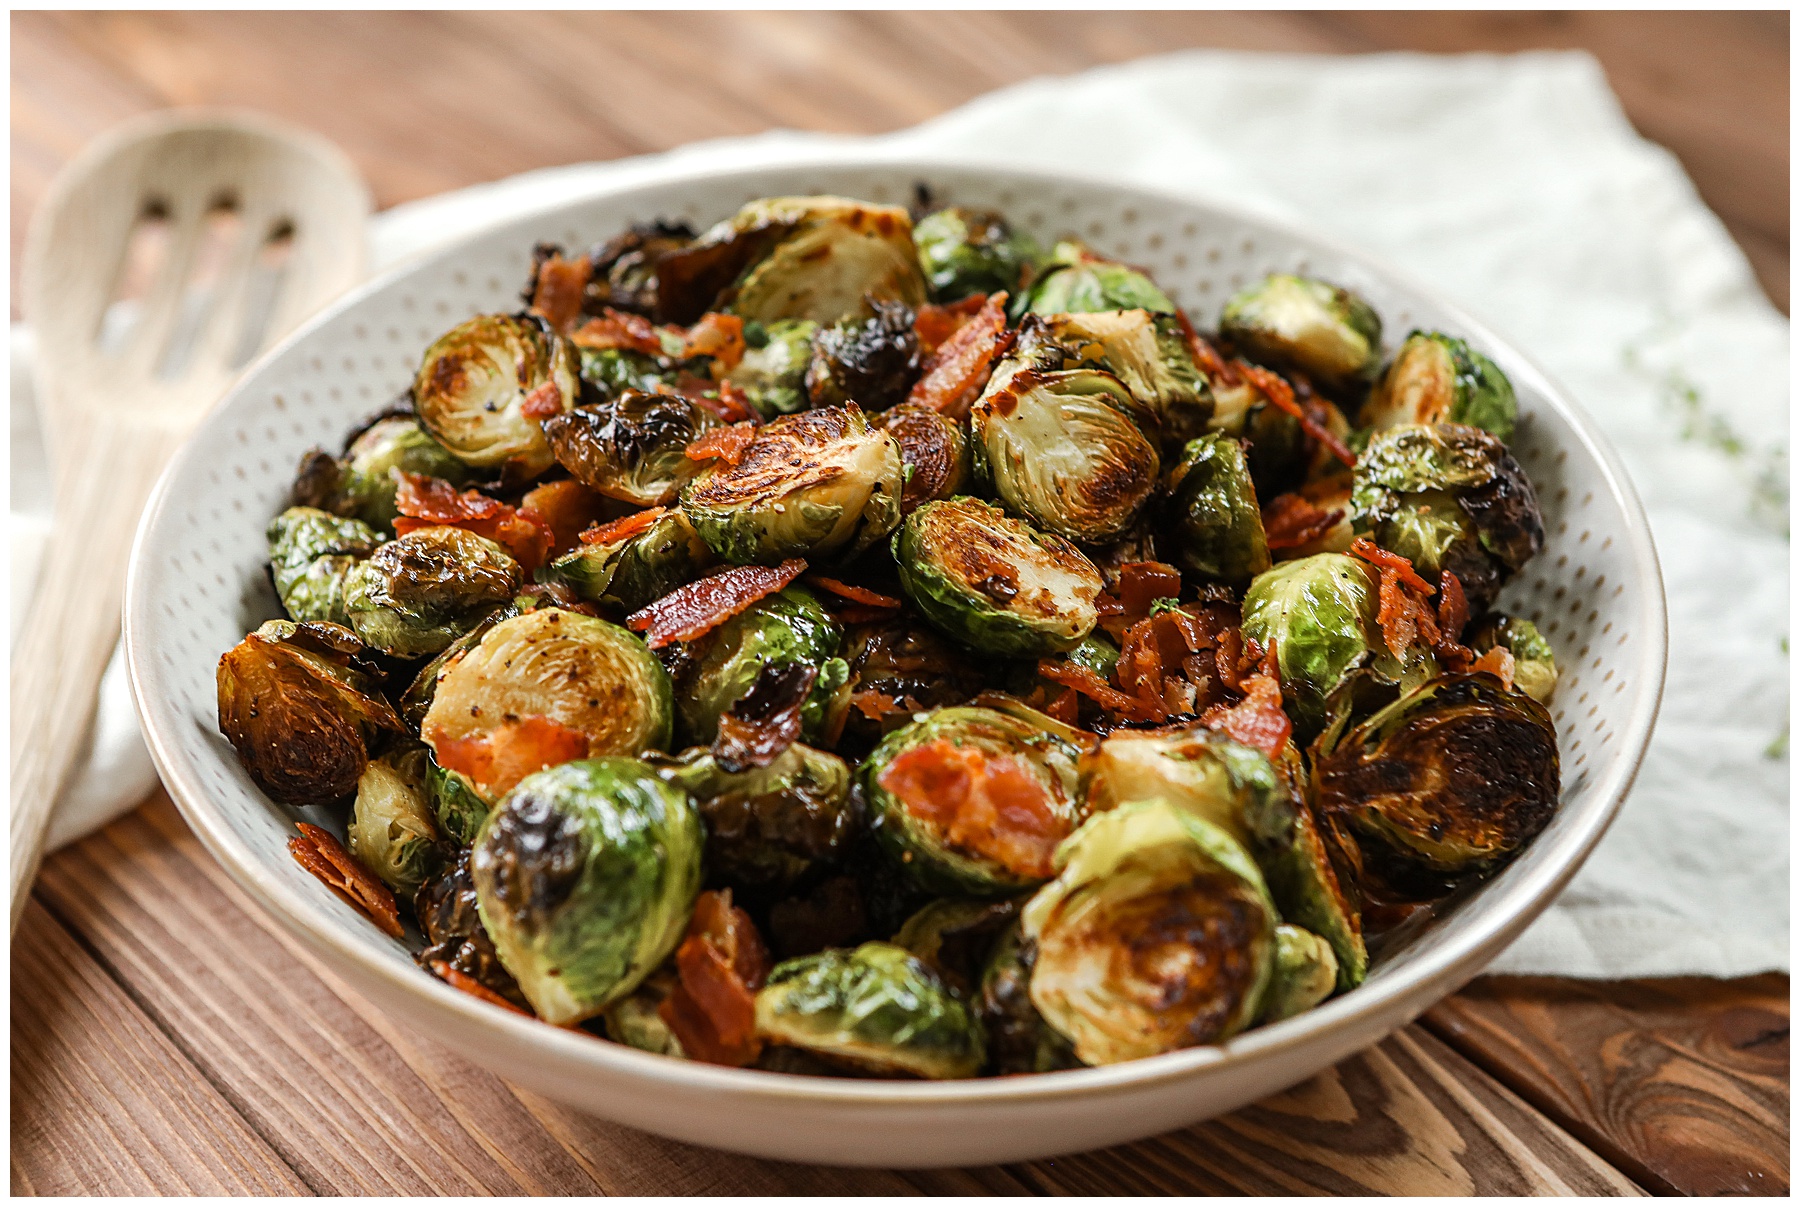 Roasted Bacon and Brussel Sprouts recipe